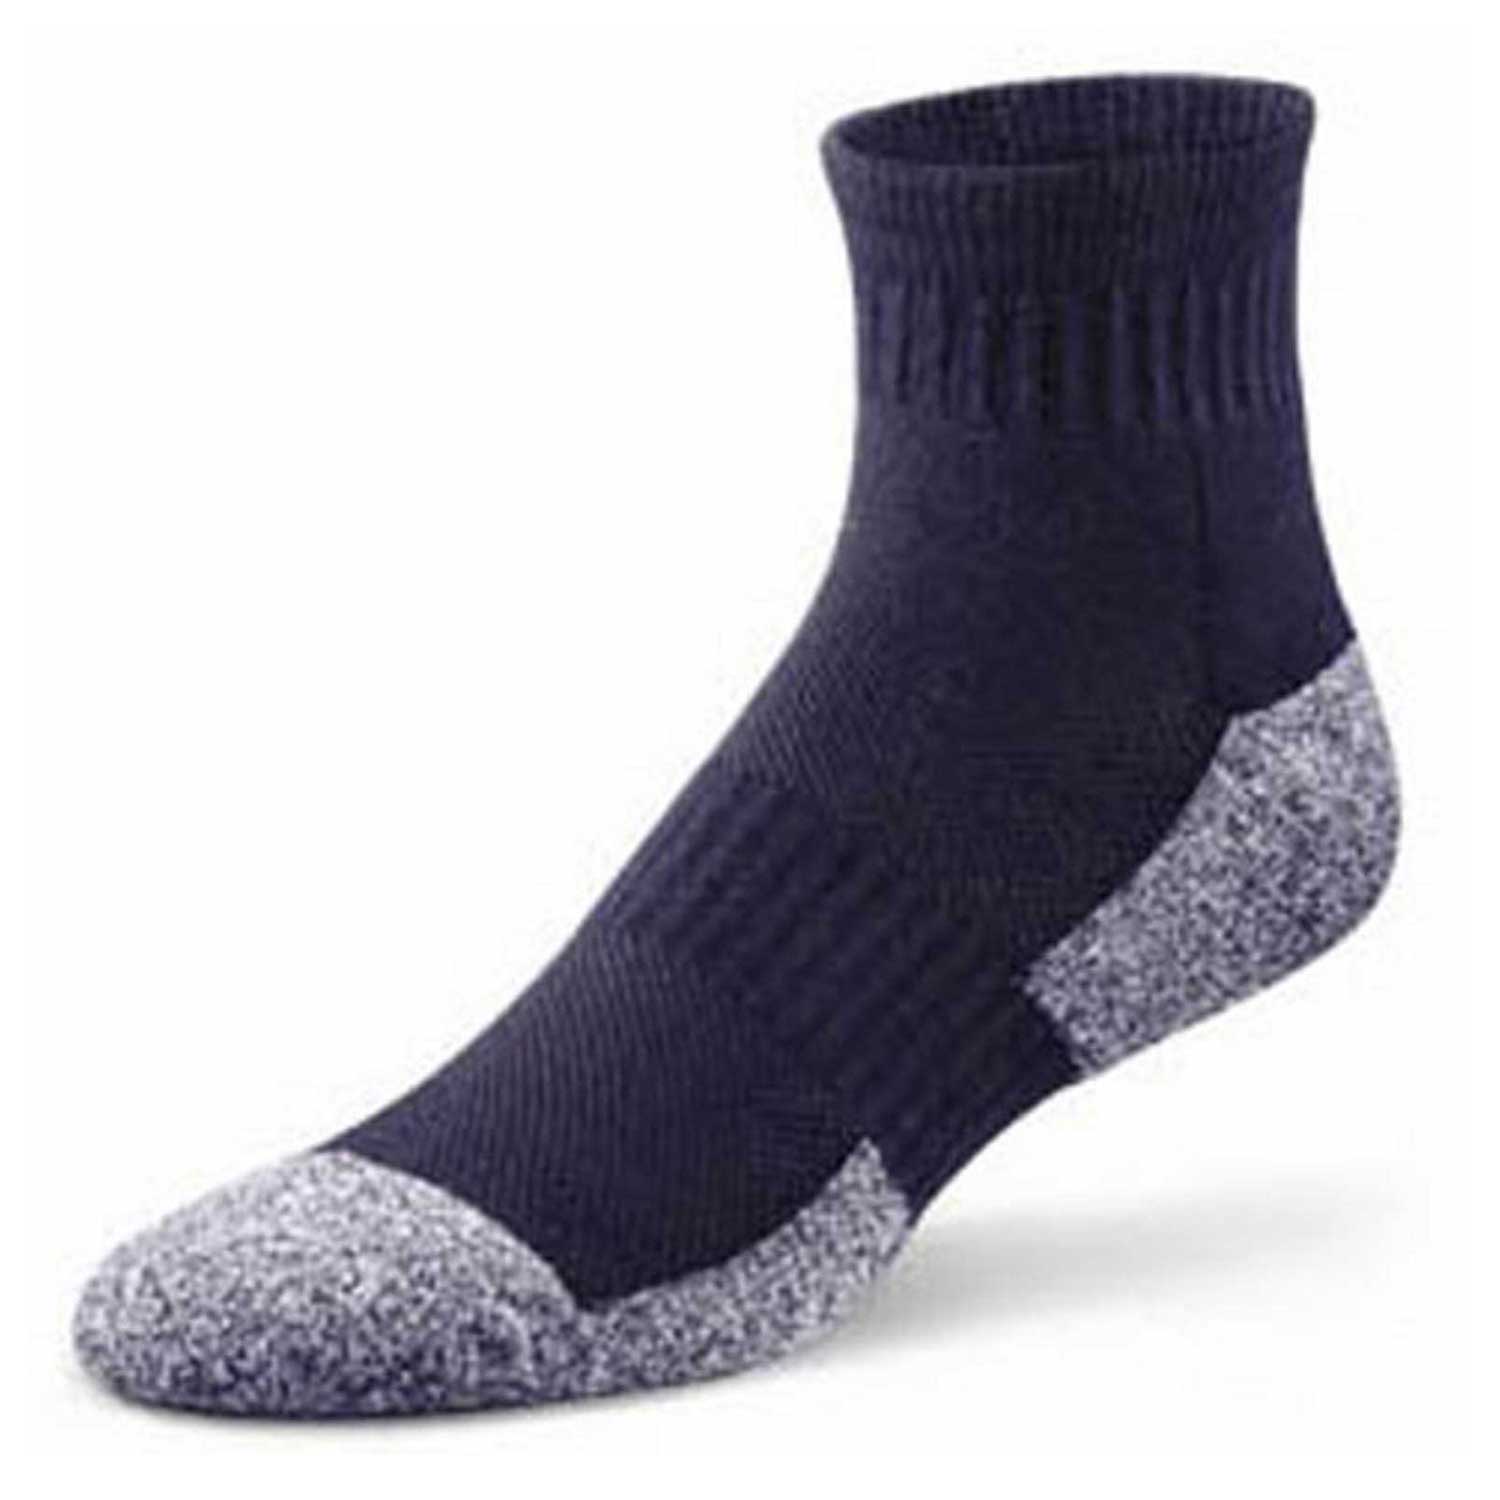 Dr. Comfort - Ankle Socks for Therapeutic, Diabetic, and Orthopedic needs